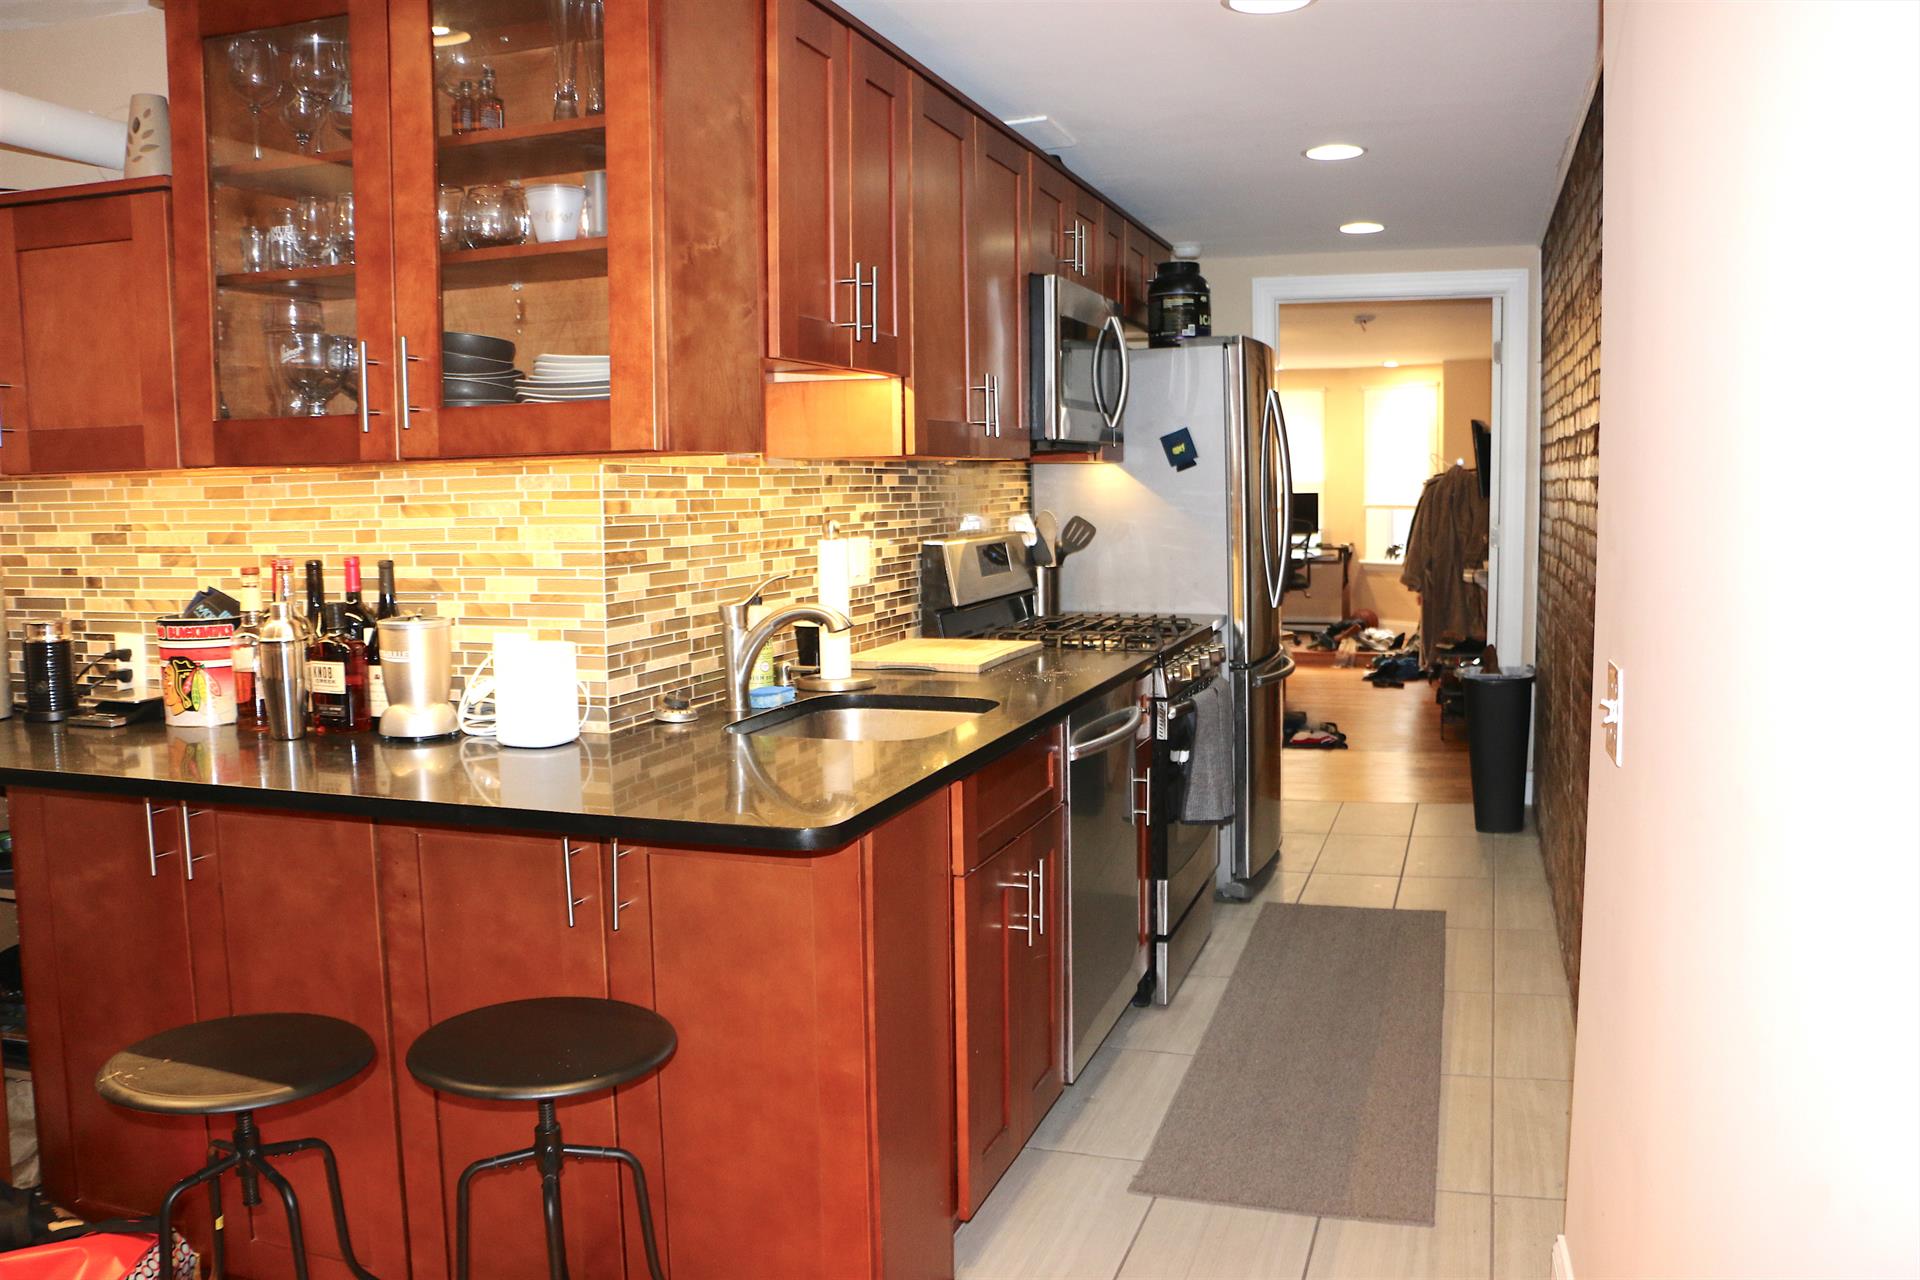 AVAIL 6/1 - Great 2 bed 2 bath prime Hoboken location - heat and hot water included in rent! Well kept kitchen and bathrooms. Kitchen features stainless steel appliances, granite countertops, and dishwasher. Common backyard and washer/dryer in the building. Conveniently located near Washington St, shops, dining, path, ferry, bus, train, entertainment, and more!